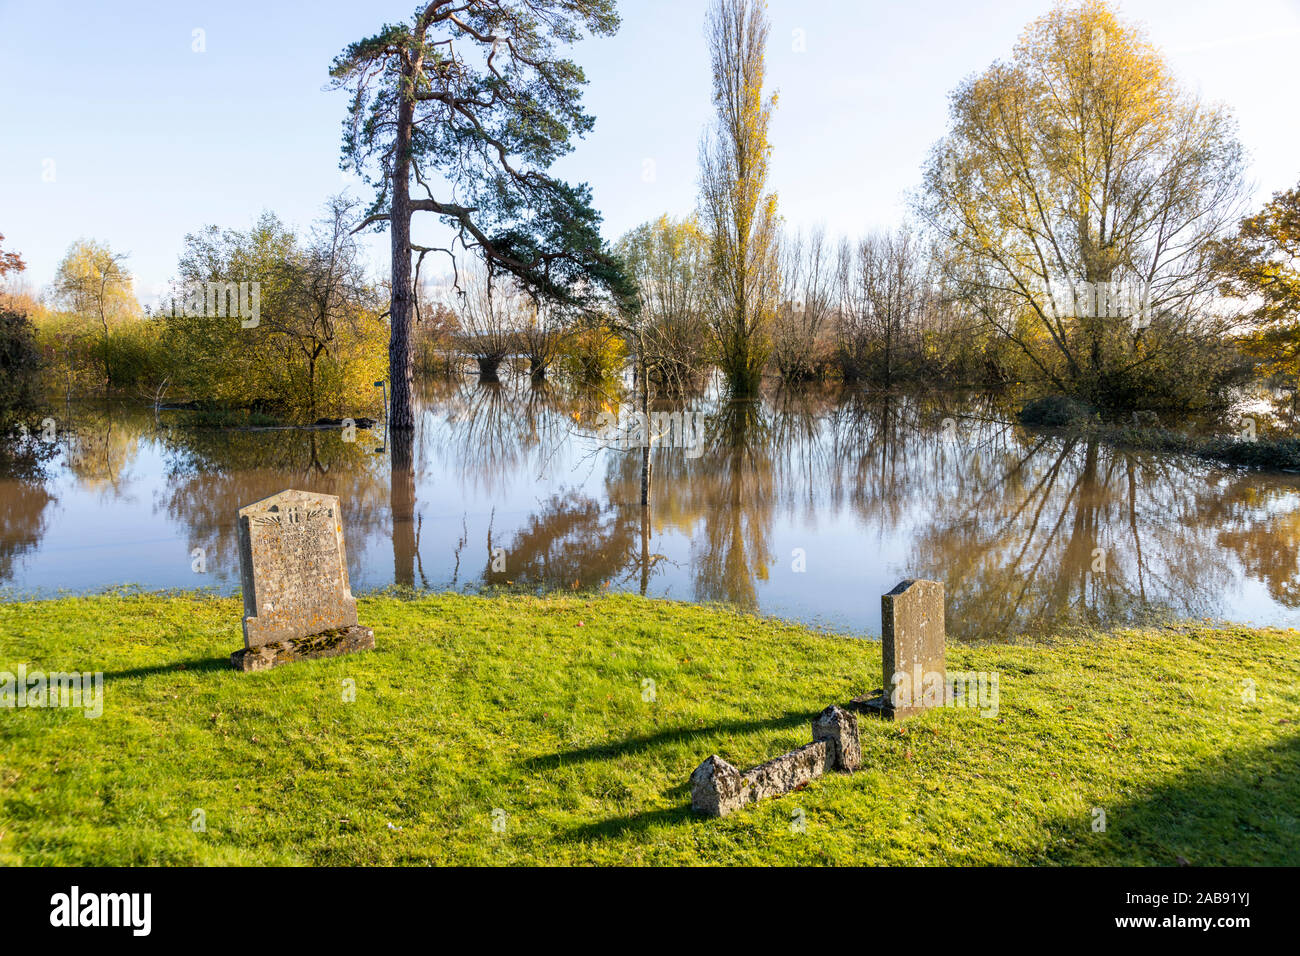 Floodwater from River Severn up to the churchyard of St John the Baptist church in the Severn Vale village of Chaceley, Gloucestershire UK 18/11/2019 Stock Photo